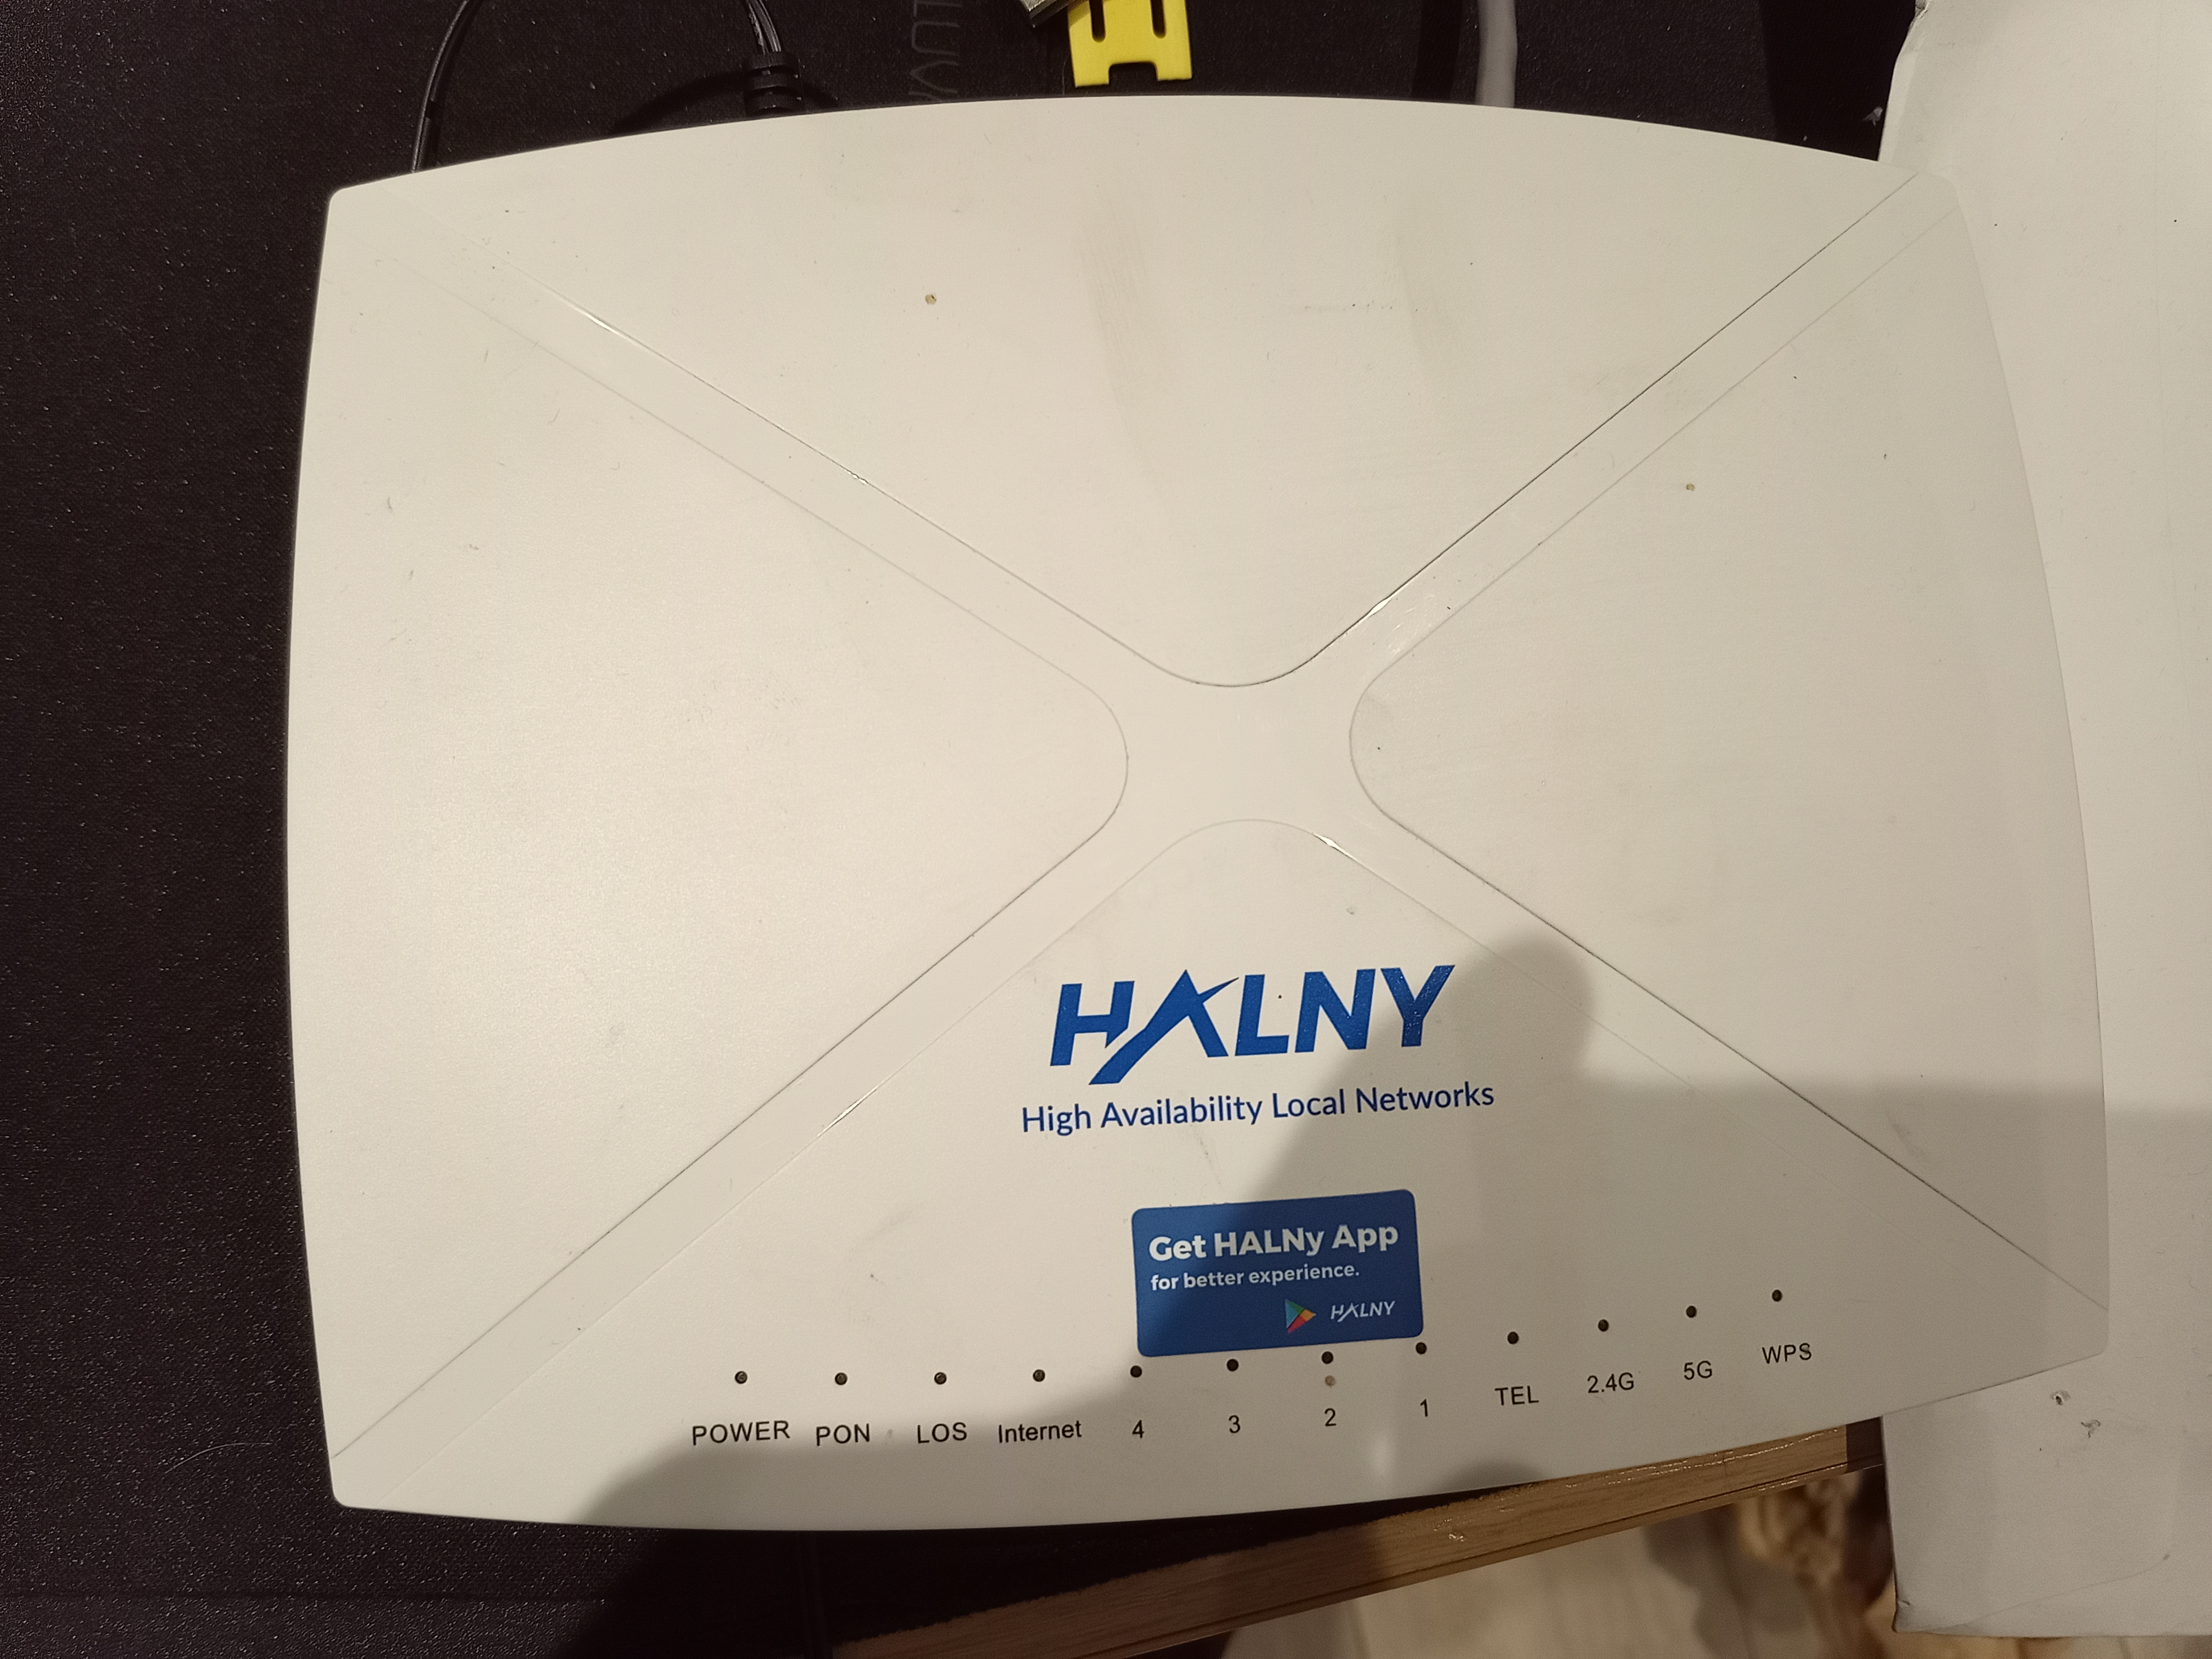 How to change the WiFi password on a HALNY HL4GQVS router